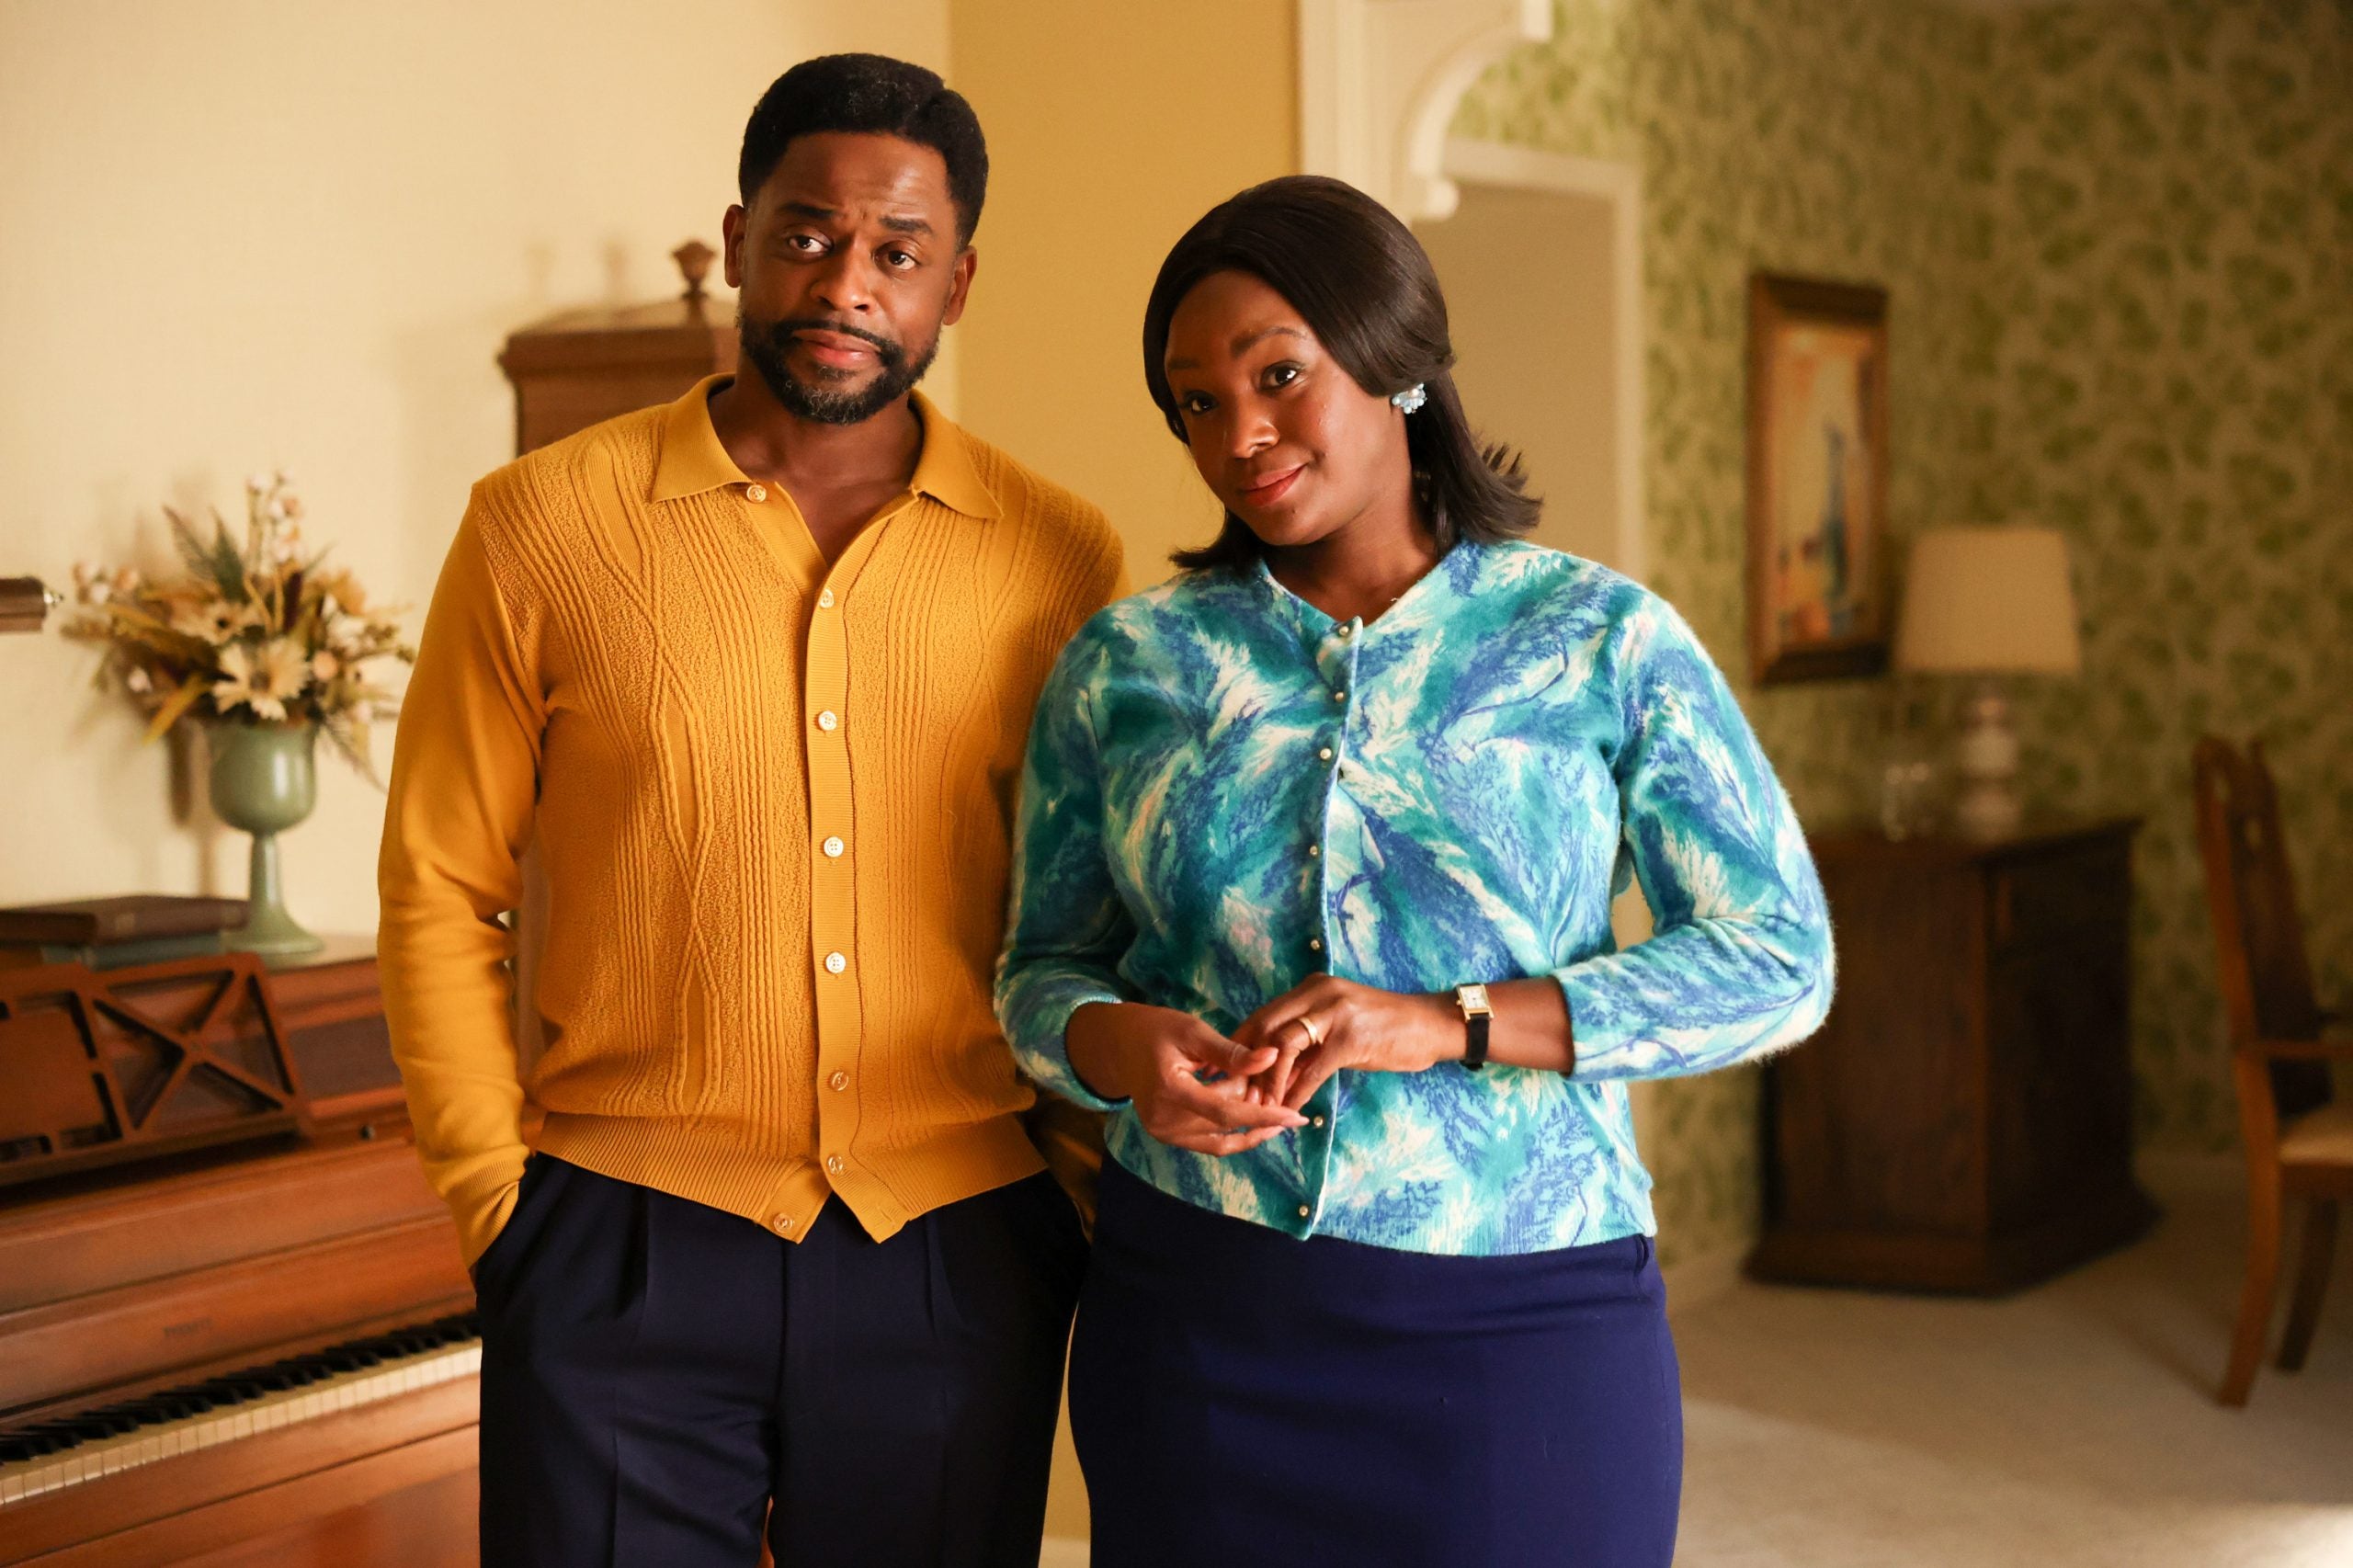 Dulé Hill and Saycon Sengbloh Bring Heart And Laughter To Civil Rights Era America In 'The Wonder Years'